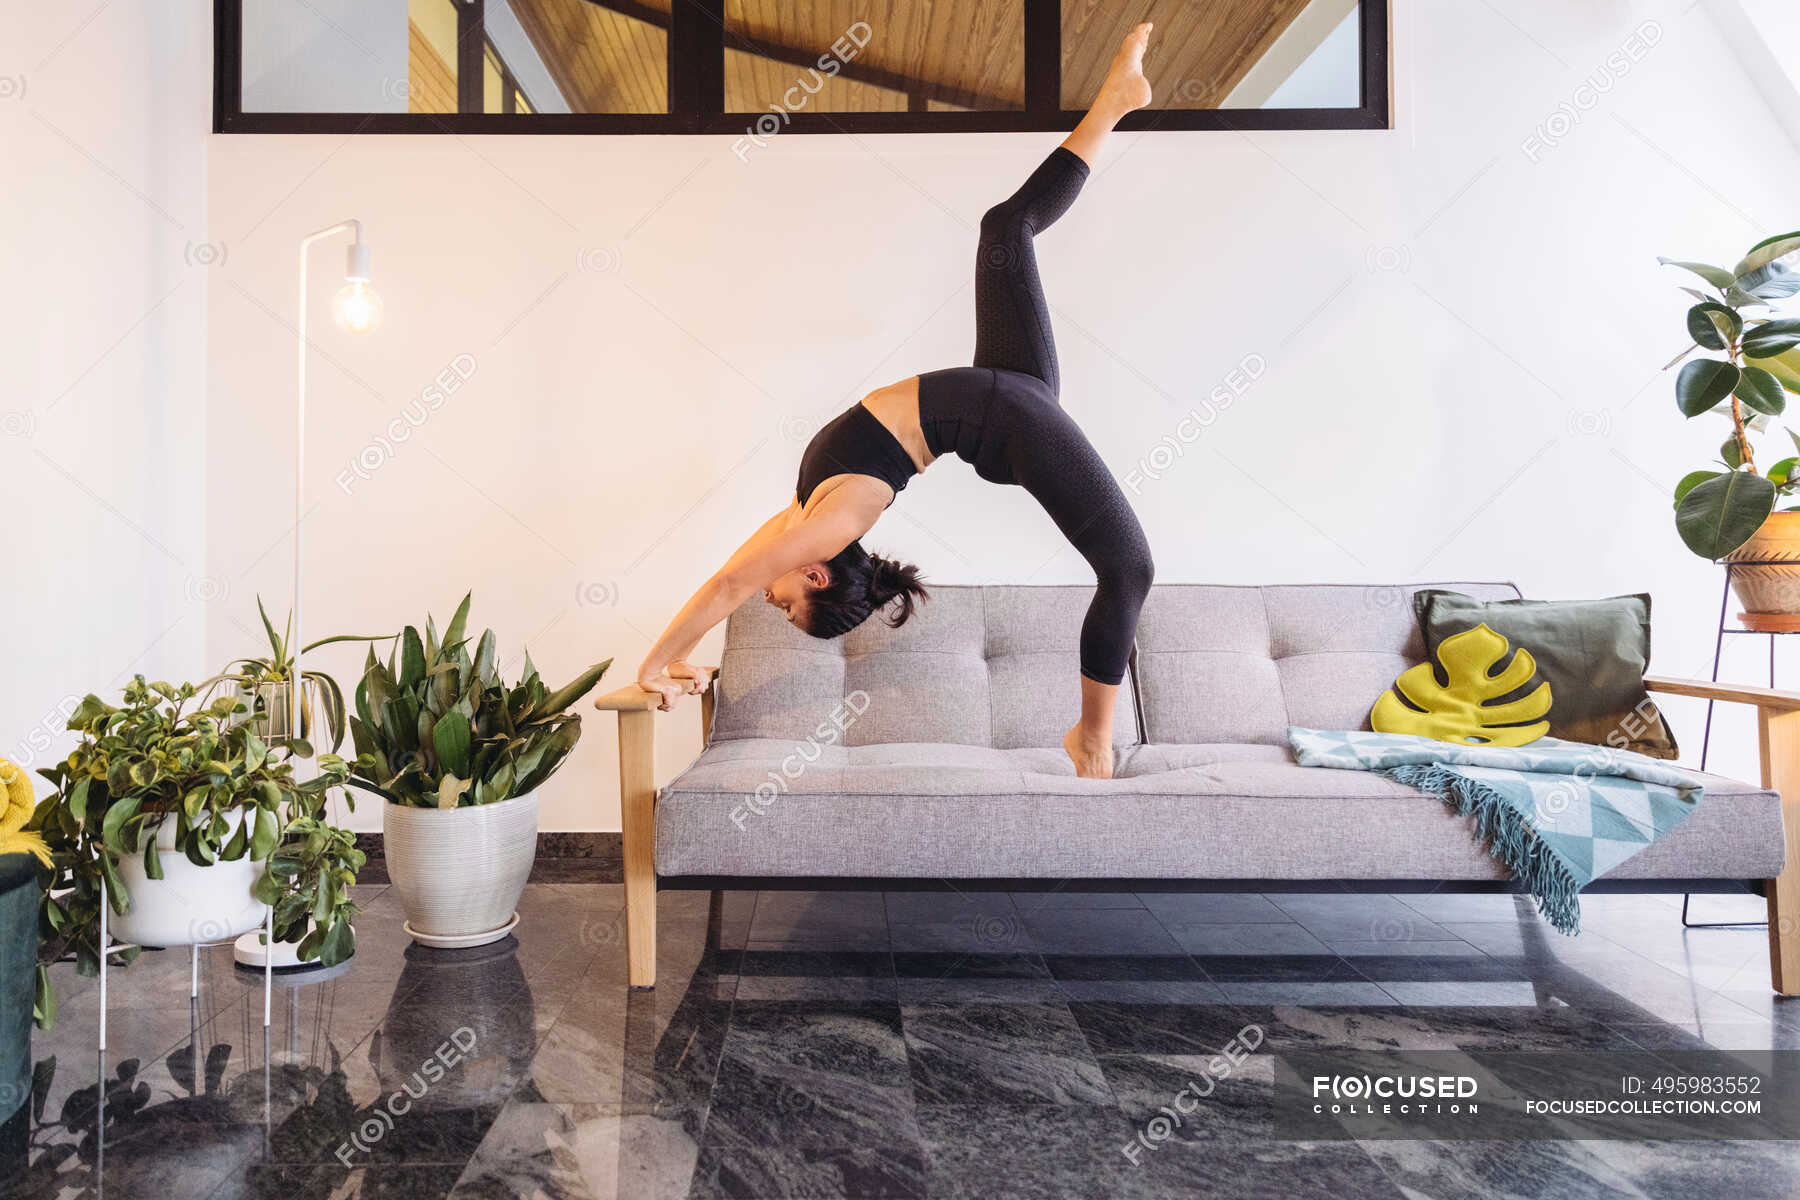 Woman practicing Yoga pose on sofa against wall in living room at home —  couch, 40s - Stock Photo | #495983552